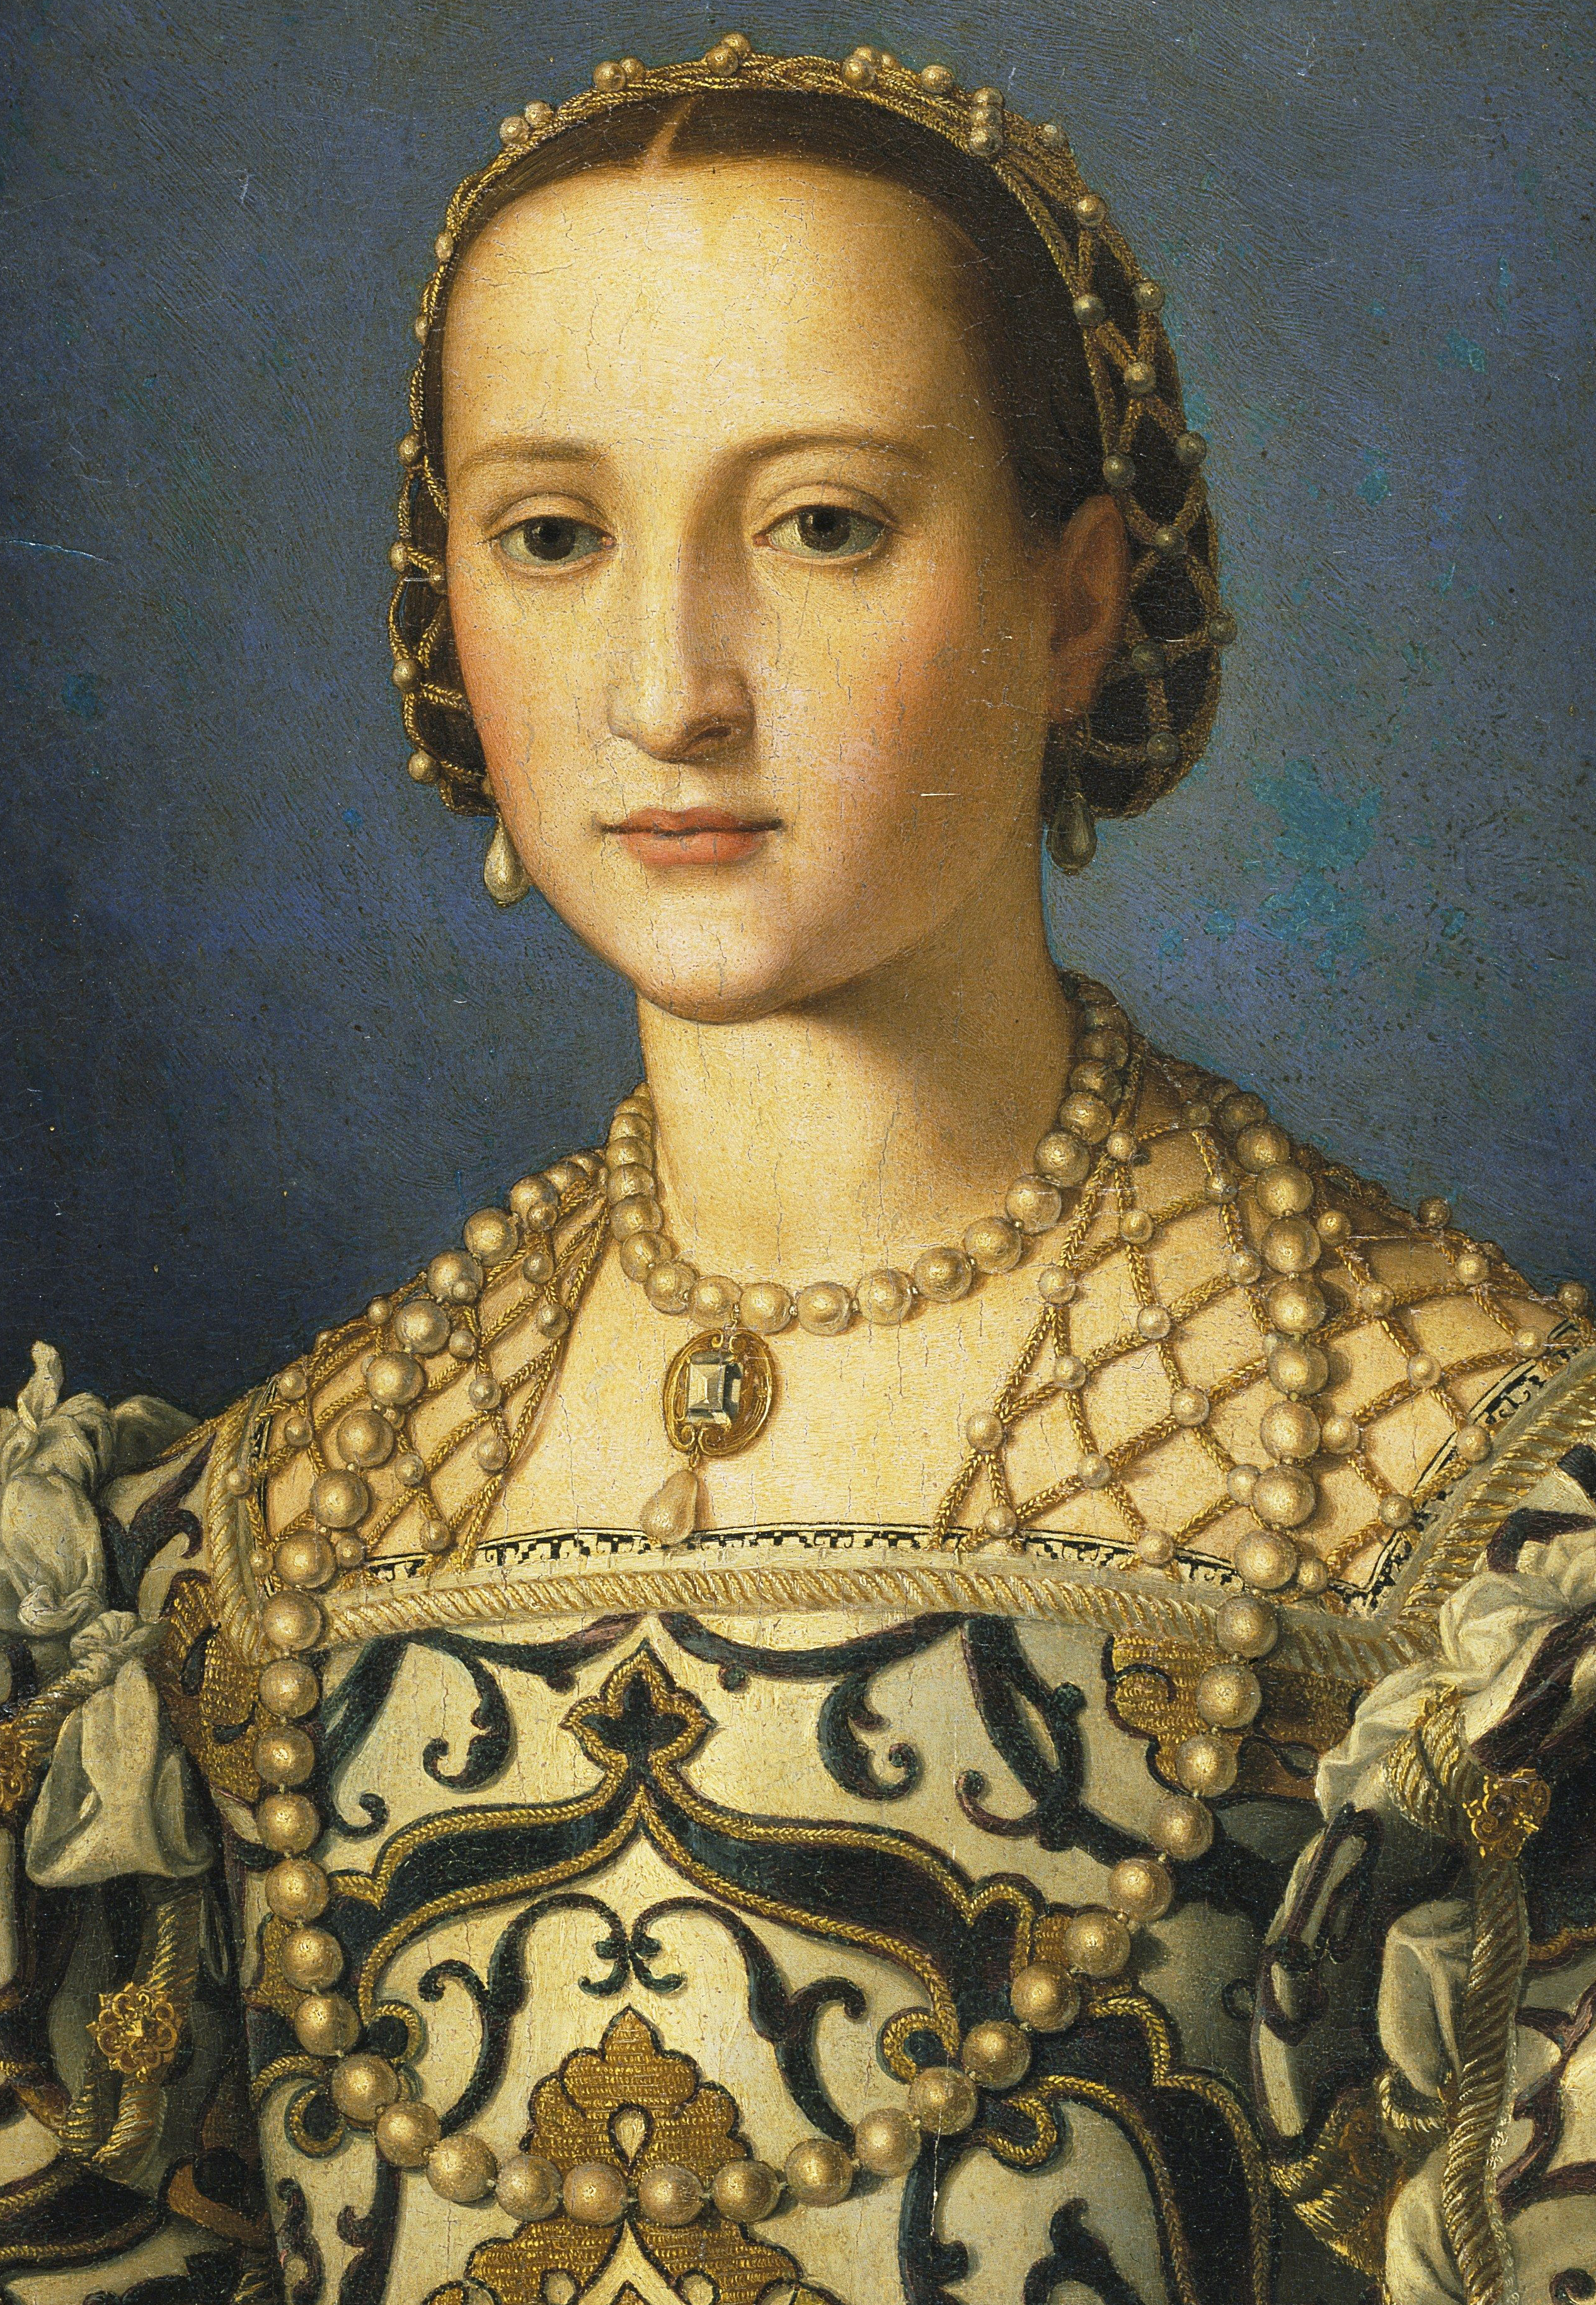 Eleonora di Toledo, 16th century. Member of the Spanish royal family during the Pearl Age. 